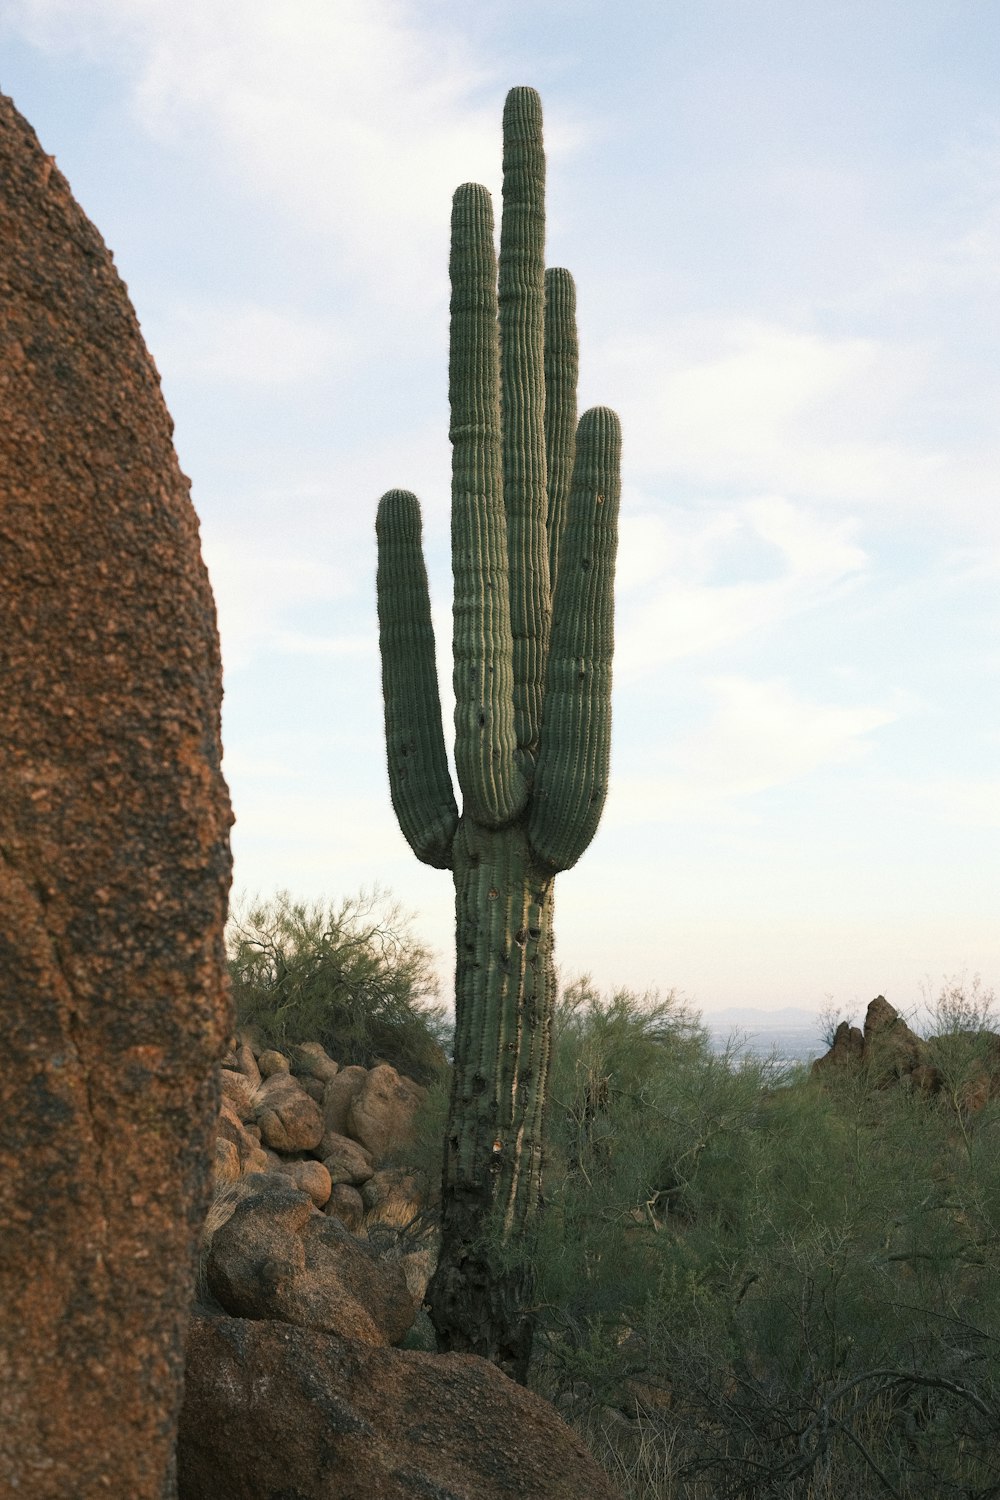 a large green cactus standing next to a large rock